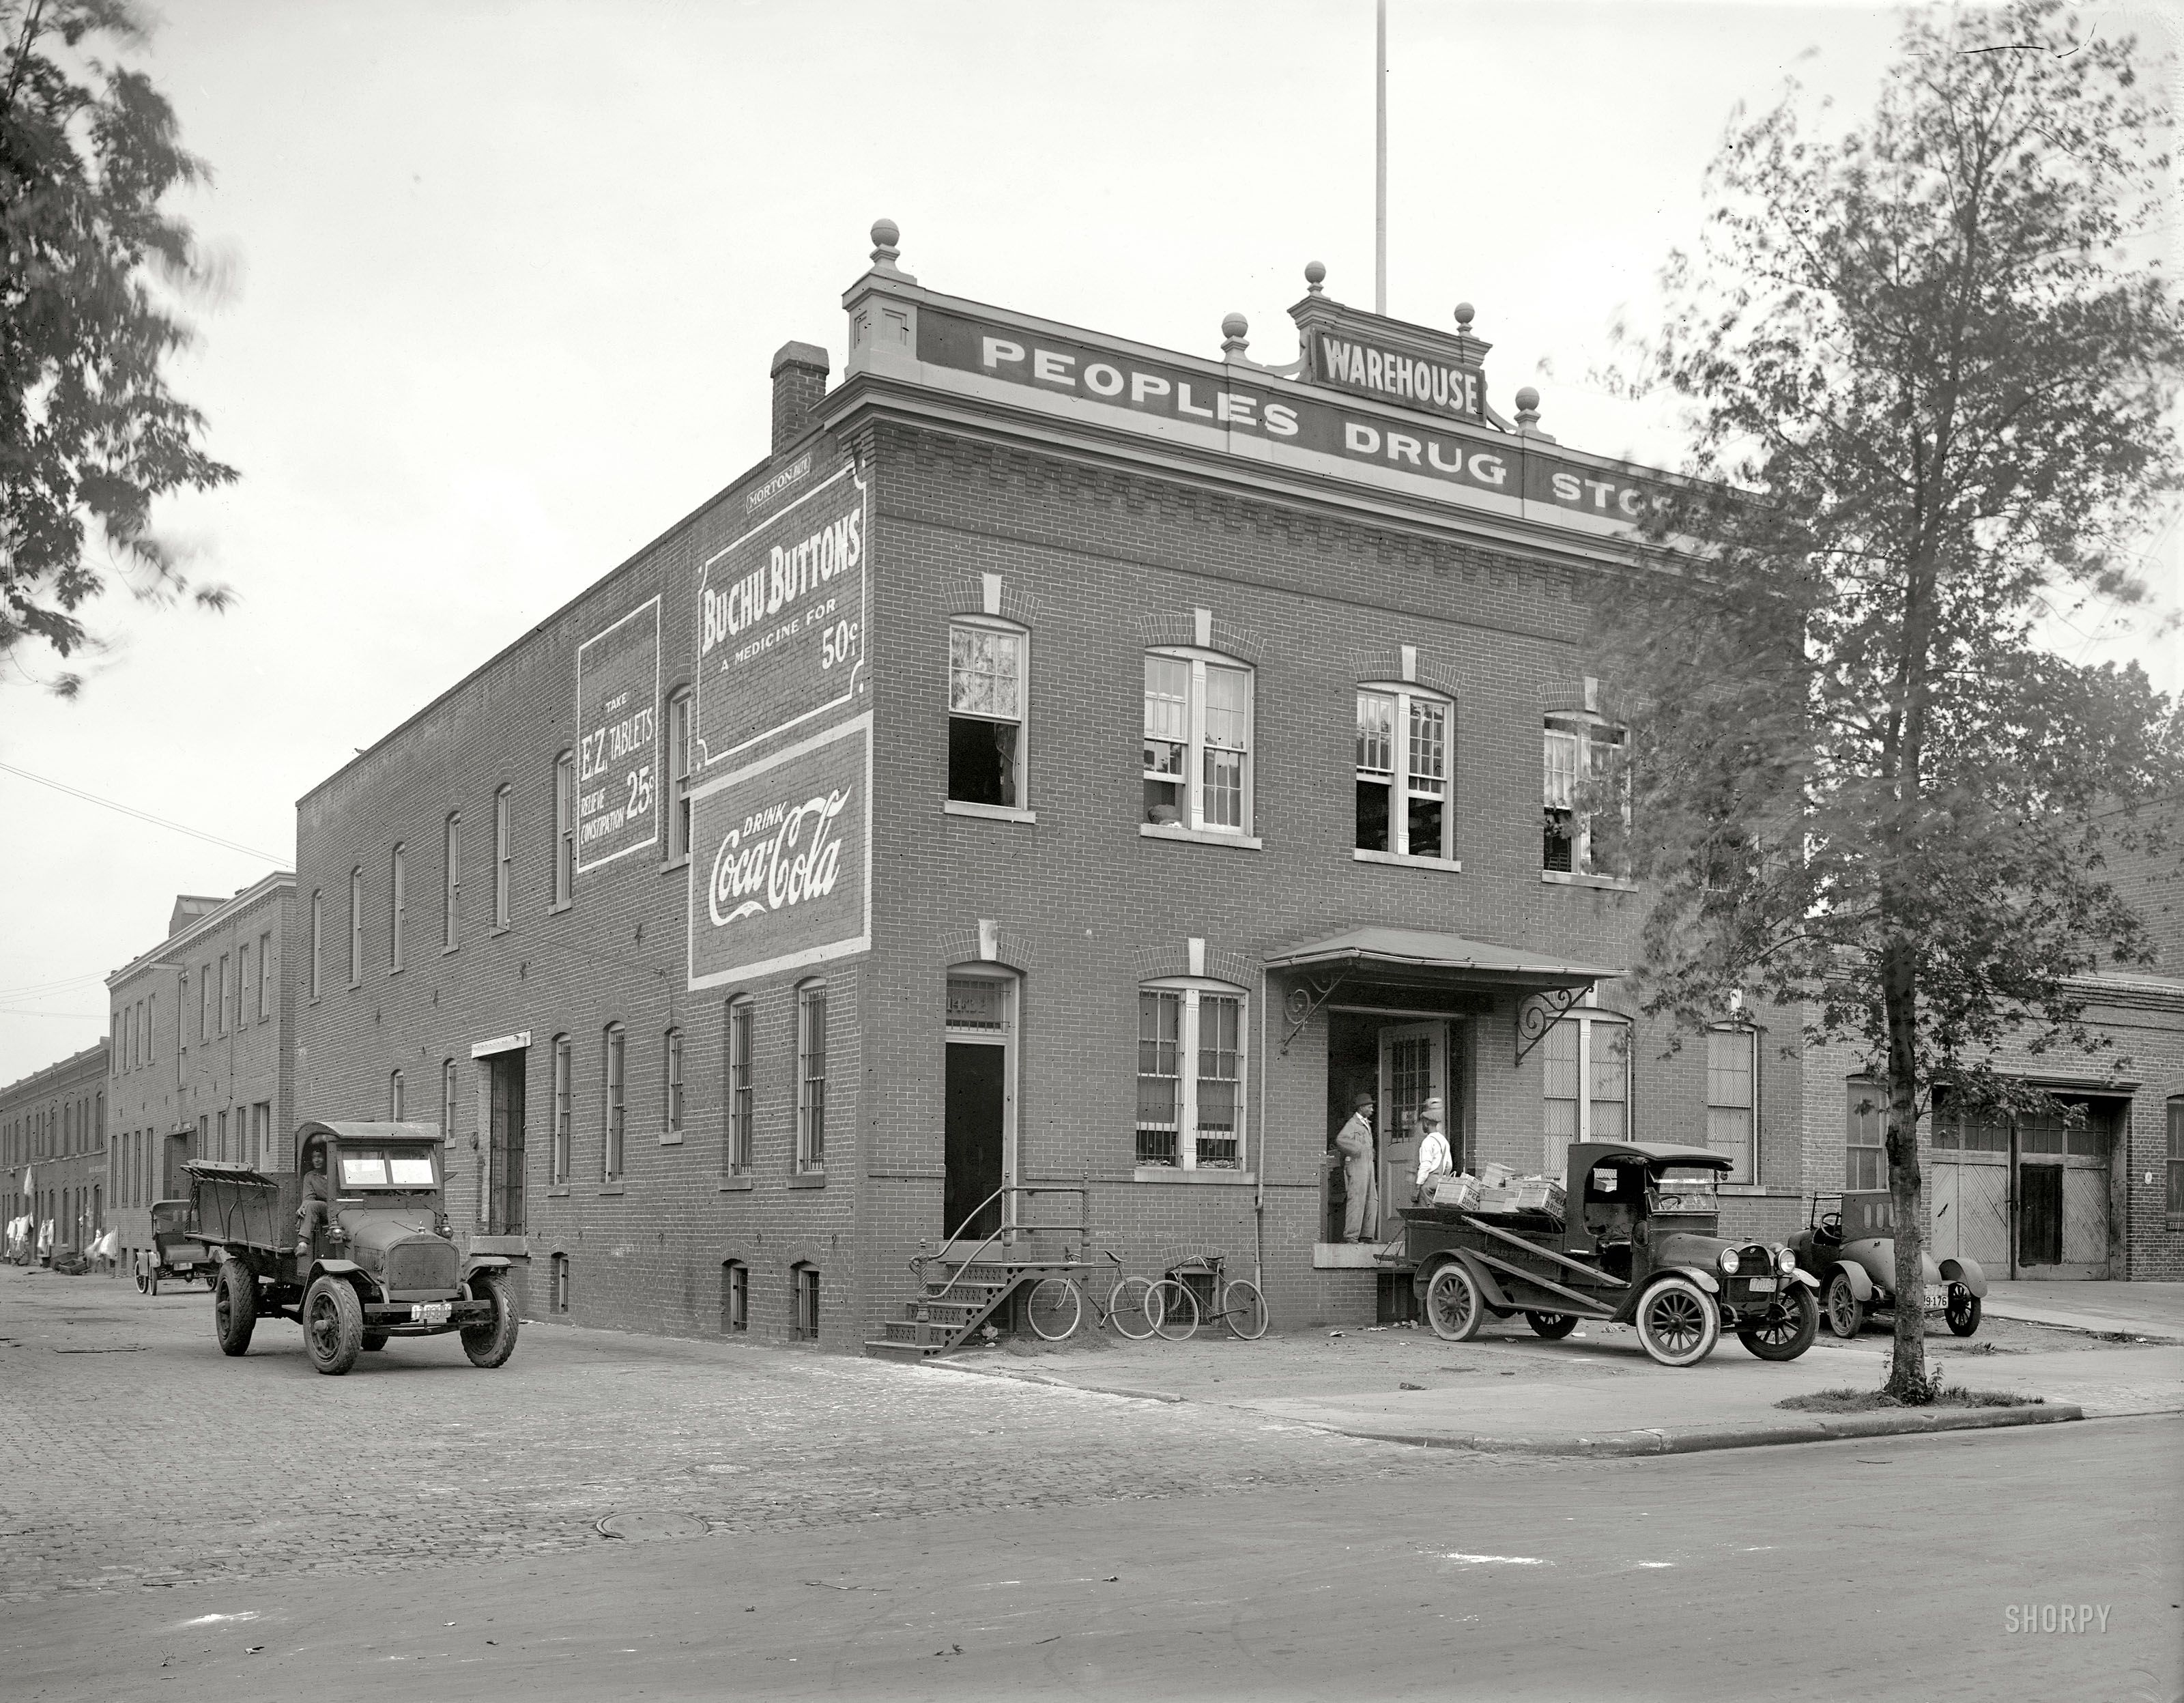 Washington, D.C., circa 1921. "People's Drug Store warehouse." An interesting history of this retail chain here. National Photo Co. View full size.